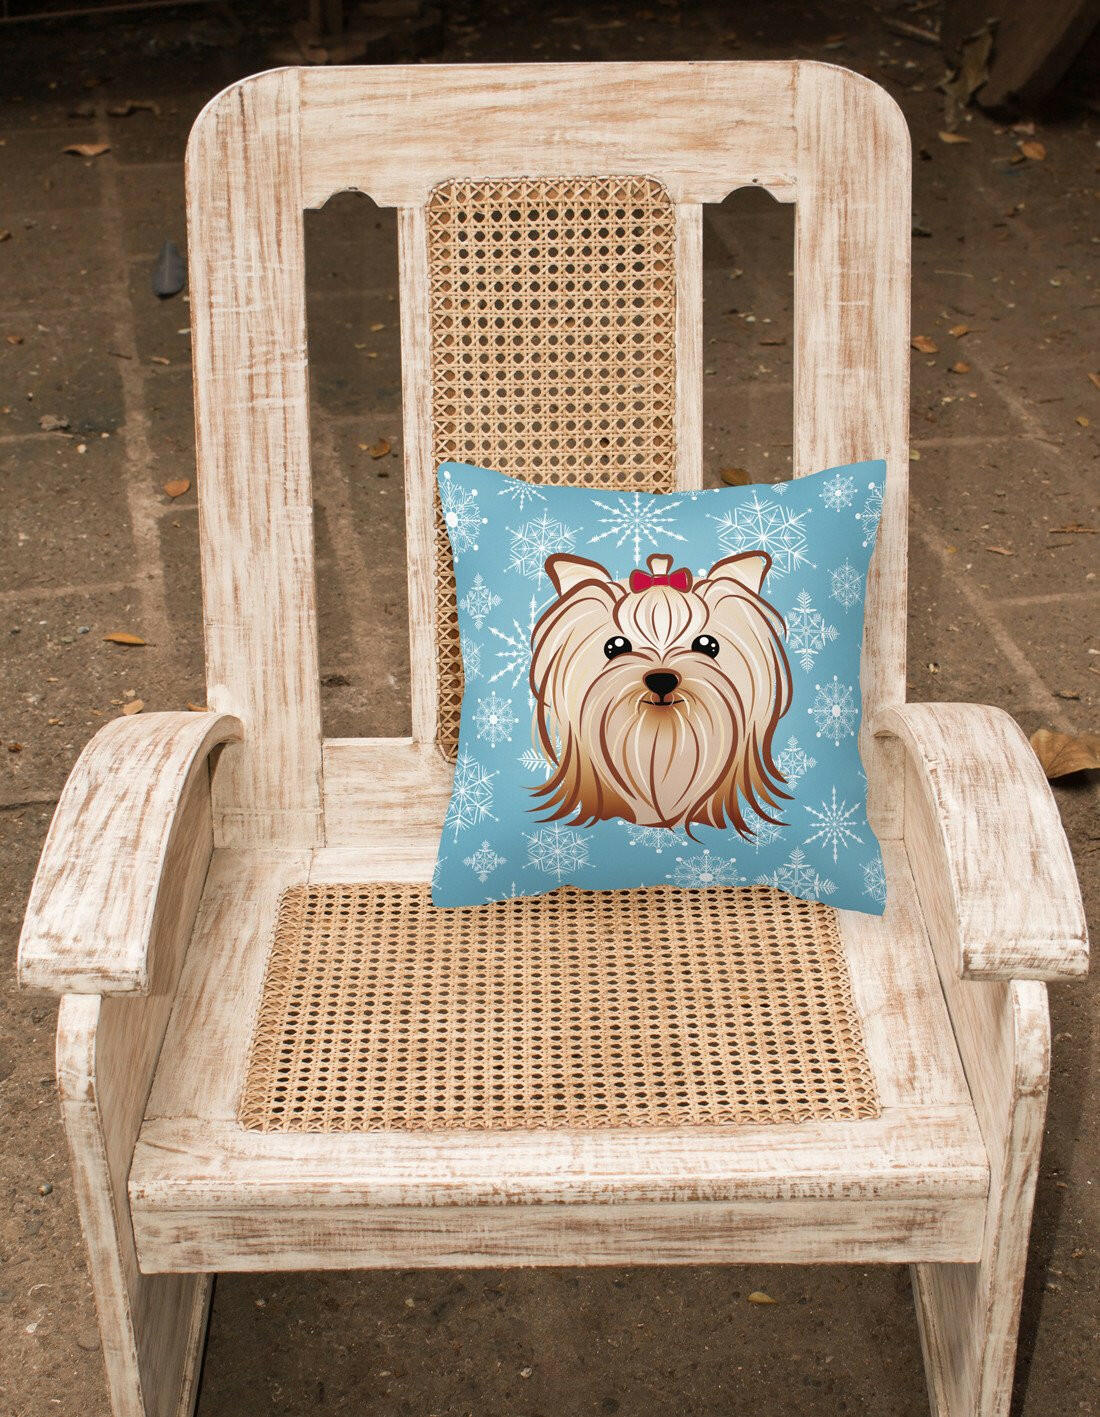 Snowflake Yorkie Yorkshire Terrier Fabric Decorative Pillow BB1638PW1414 - the-store.com